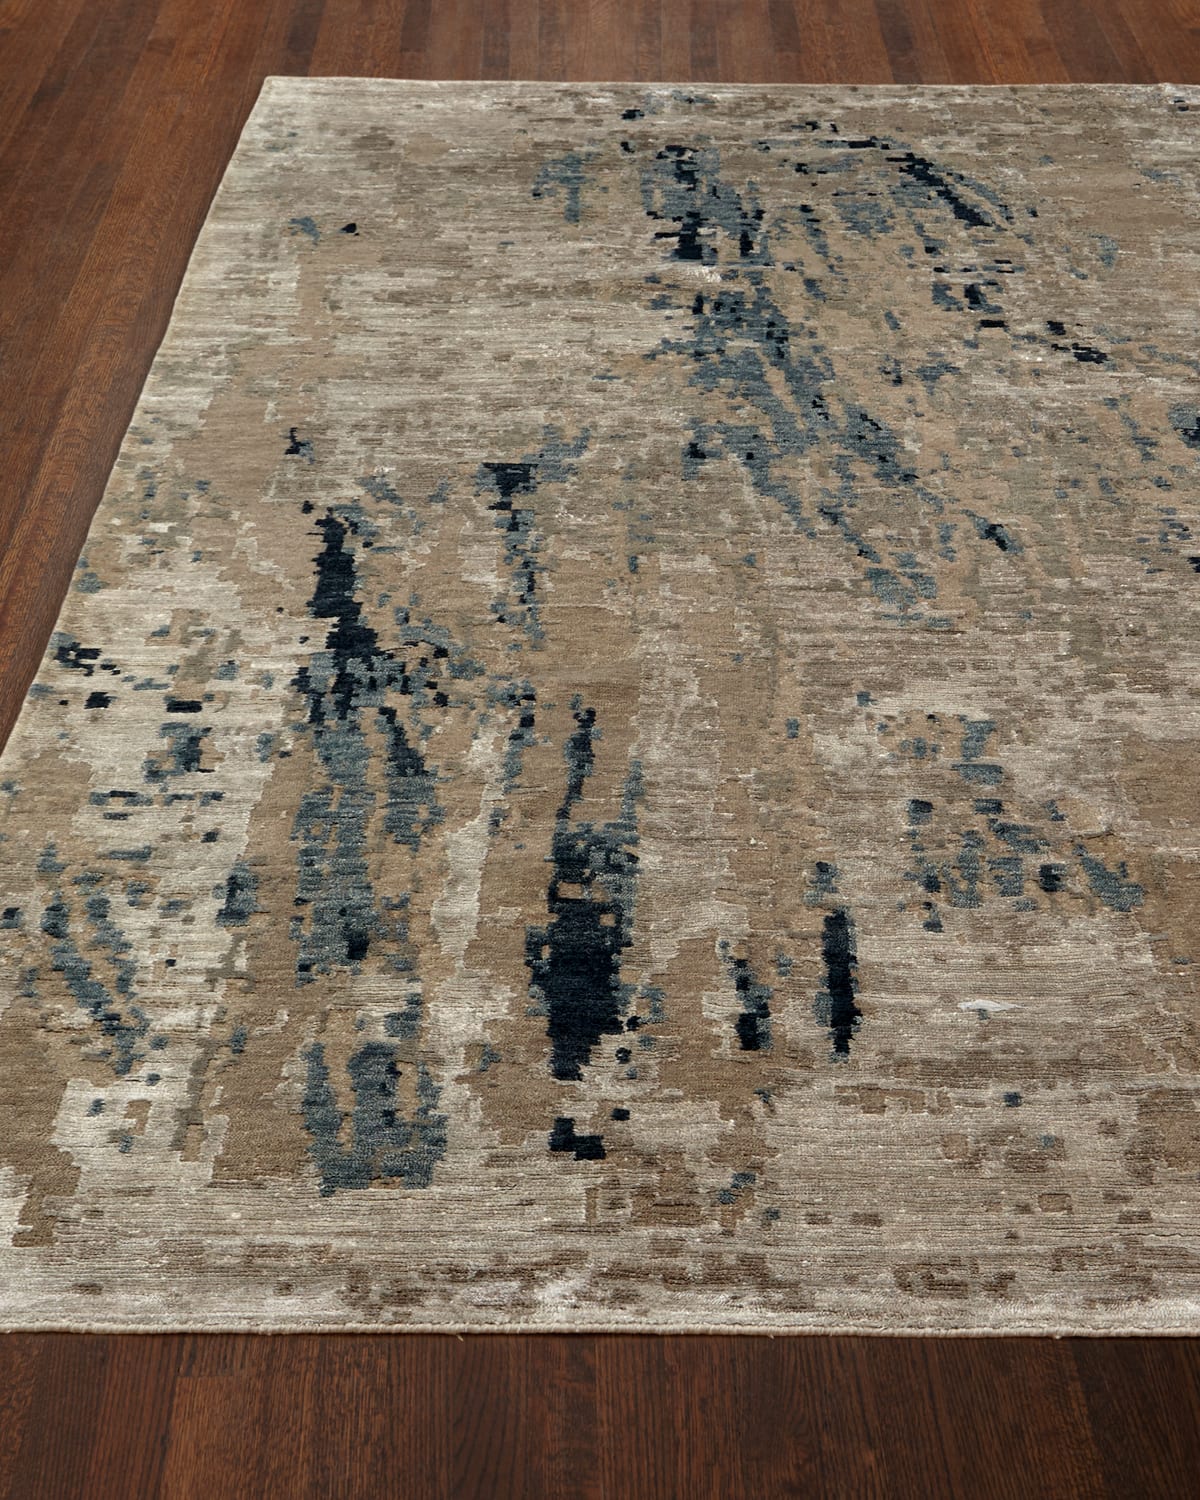 Ursula Hand Knotted Rug, 6' x 9'